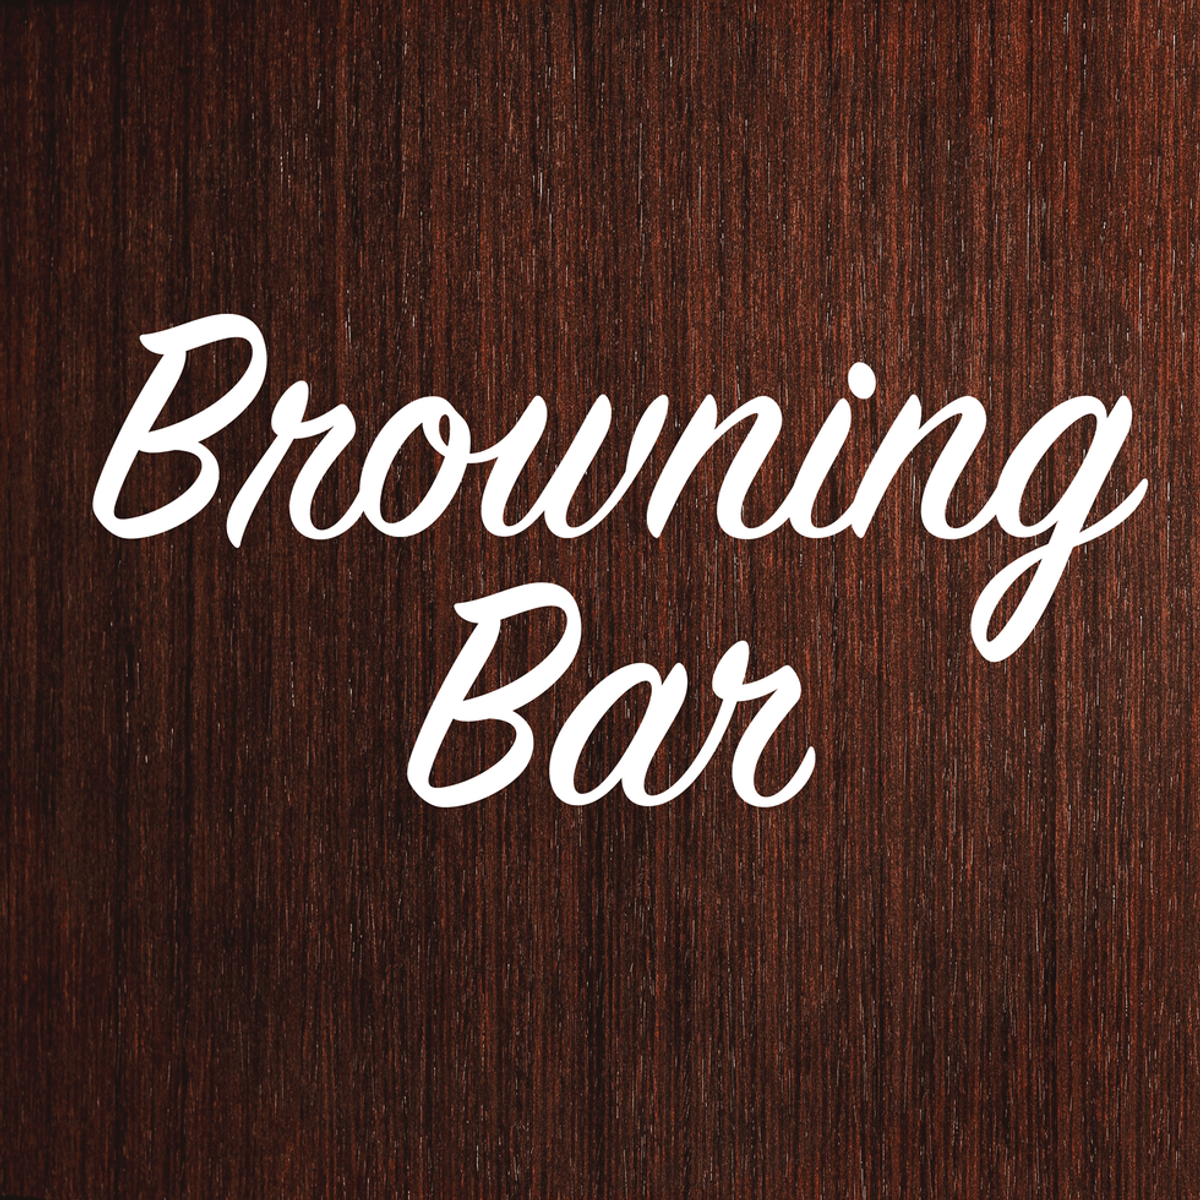 Browning Bar: College-Level Sushi